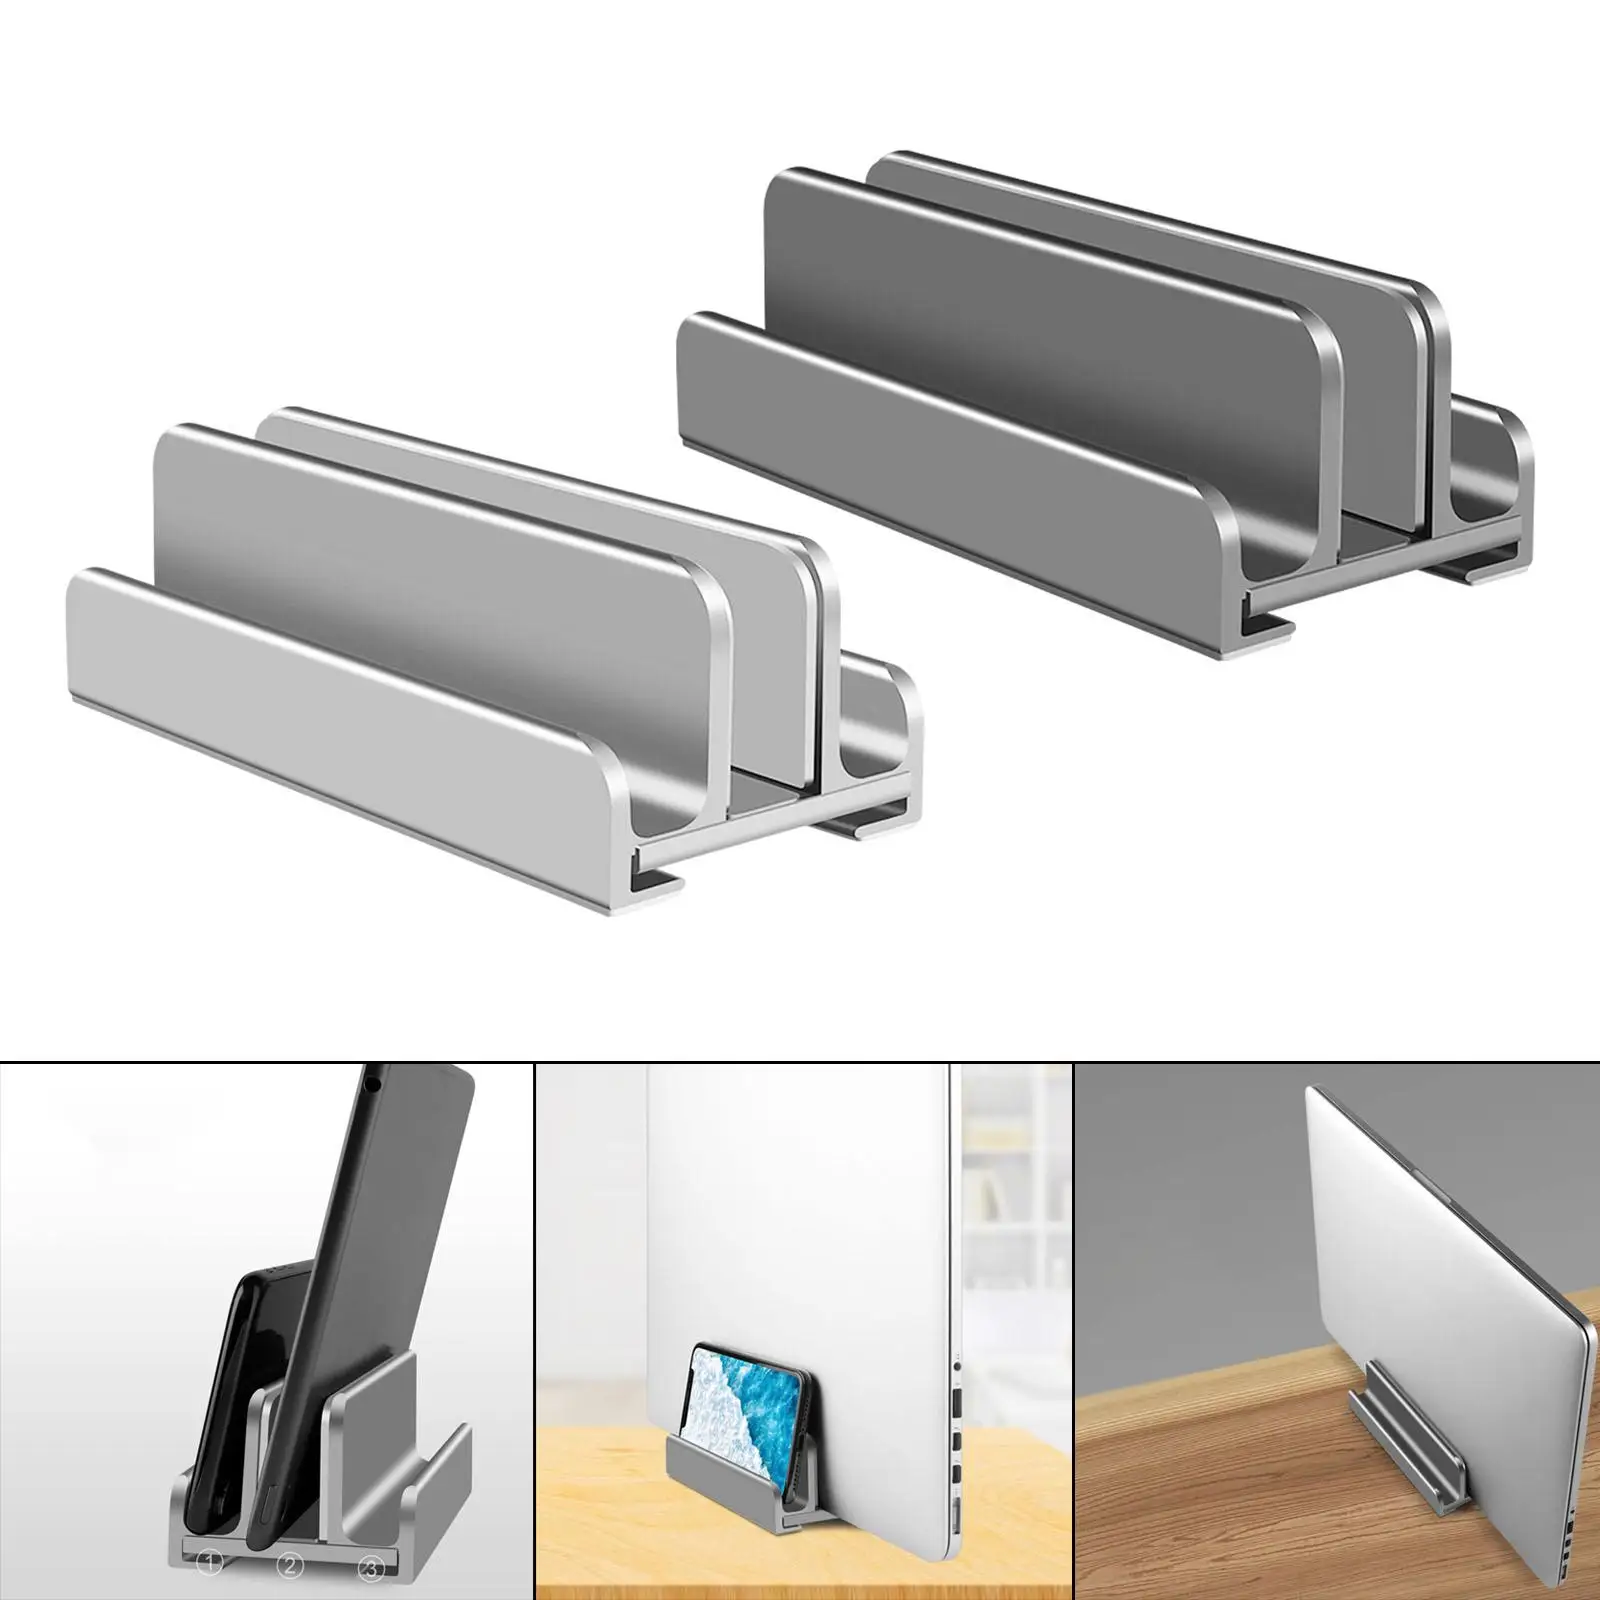 3 in 1 Vertical Laptop Stand Stand Holder, 3 Slots, Stable Adjustable Notebook Dock for Notebooks for iPad Organizer Desks